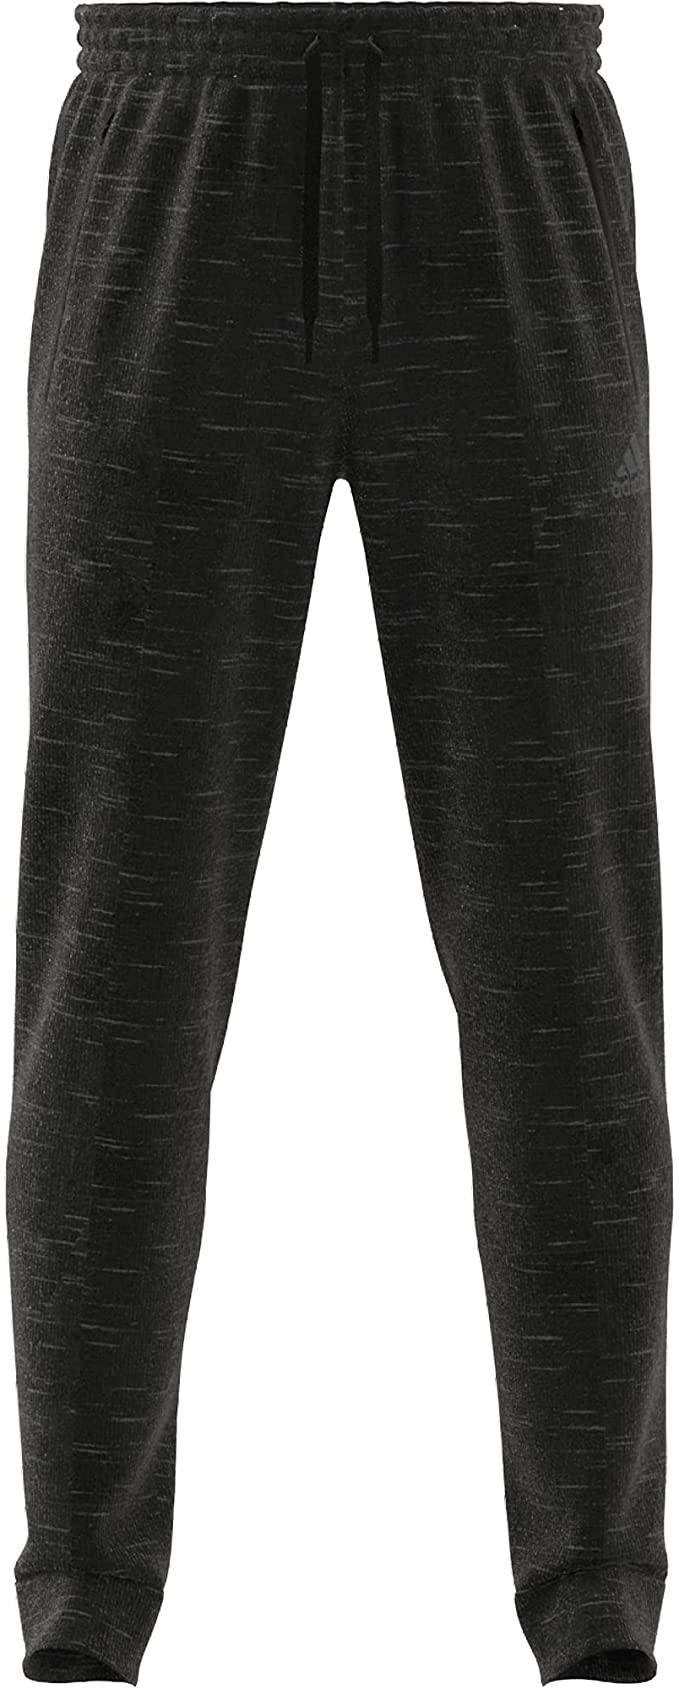 Adidas Men's Melange Pants-ADIDAS-Sports Replay - Sports Excellence